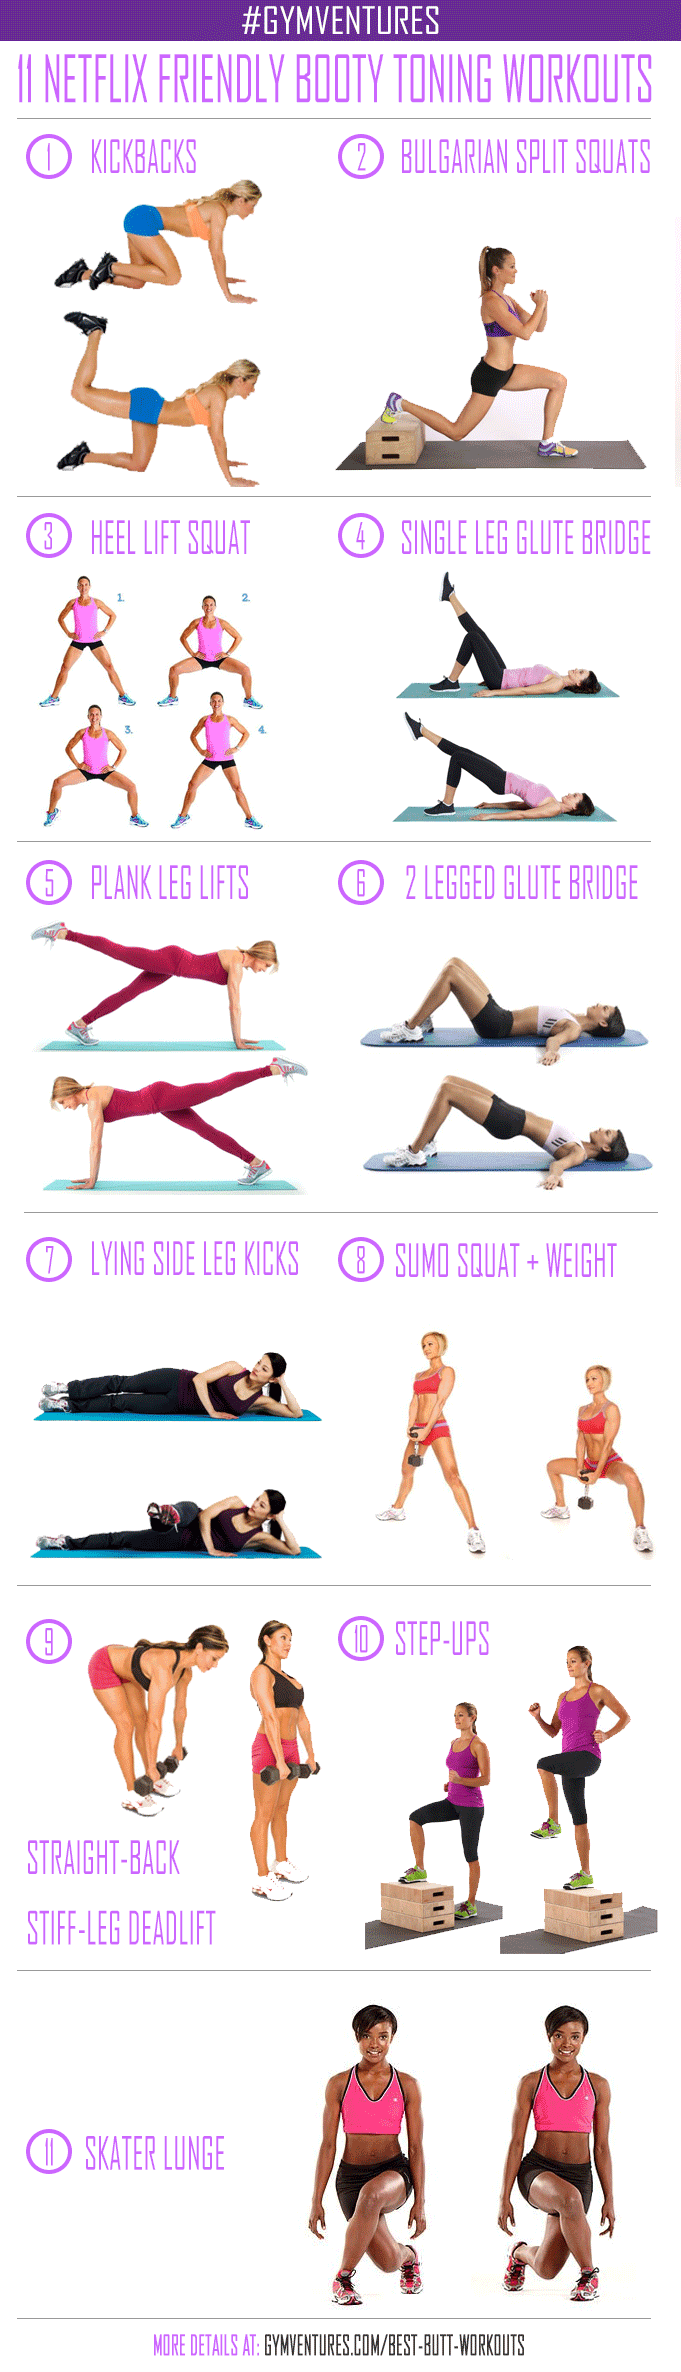 Best Butt Workouts You Can Do at Home [+INFOGRAPHIC]